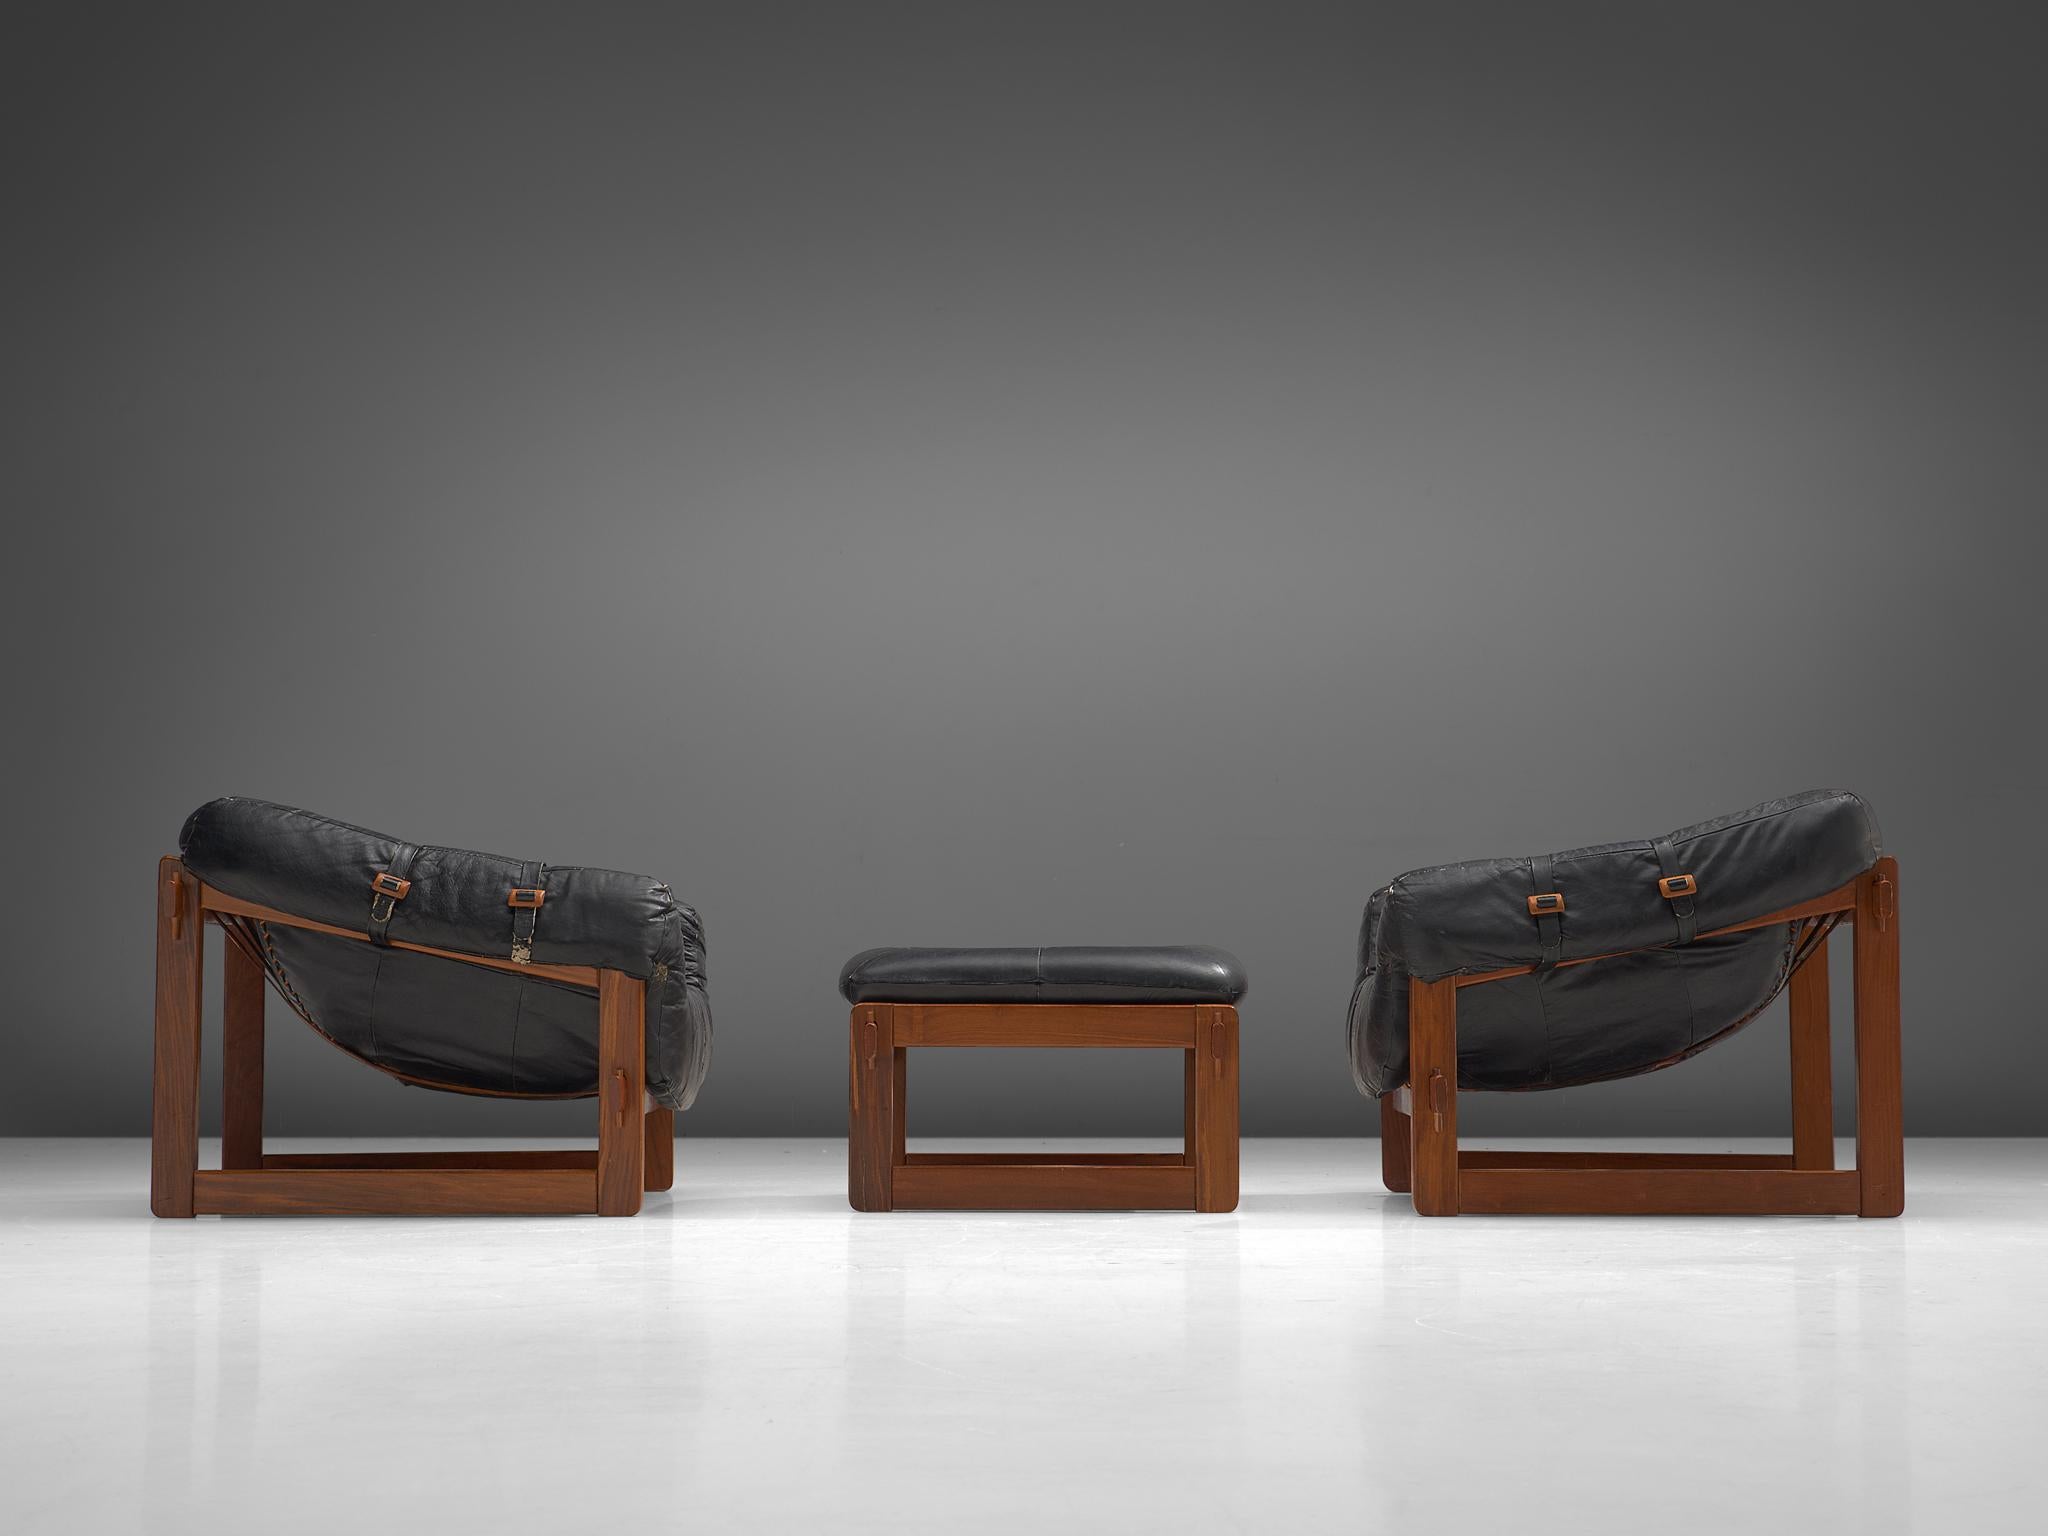 Brazilian Pair of Lounge Chairs with Ottoman in Black Leather by Percival Lafer